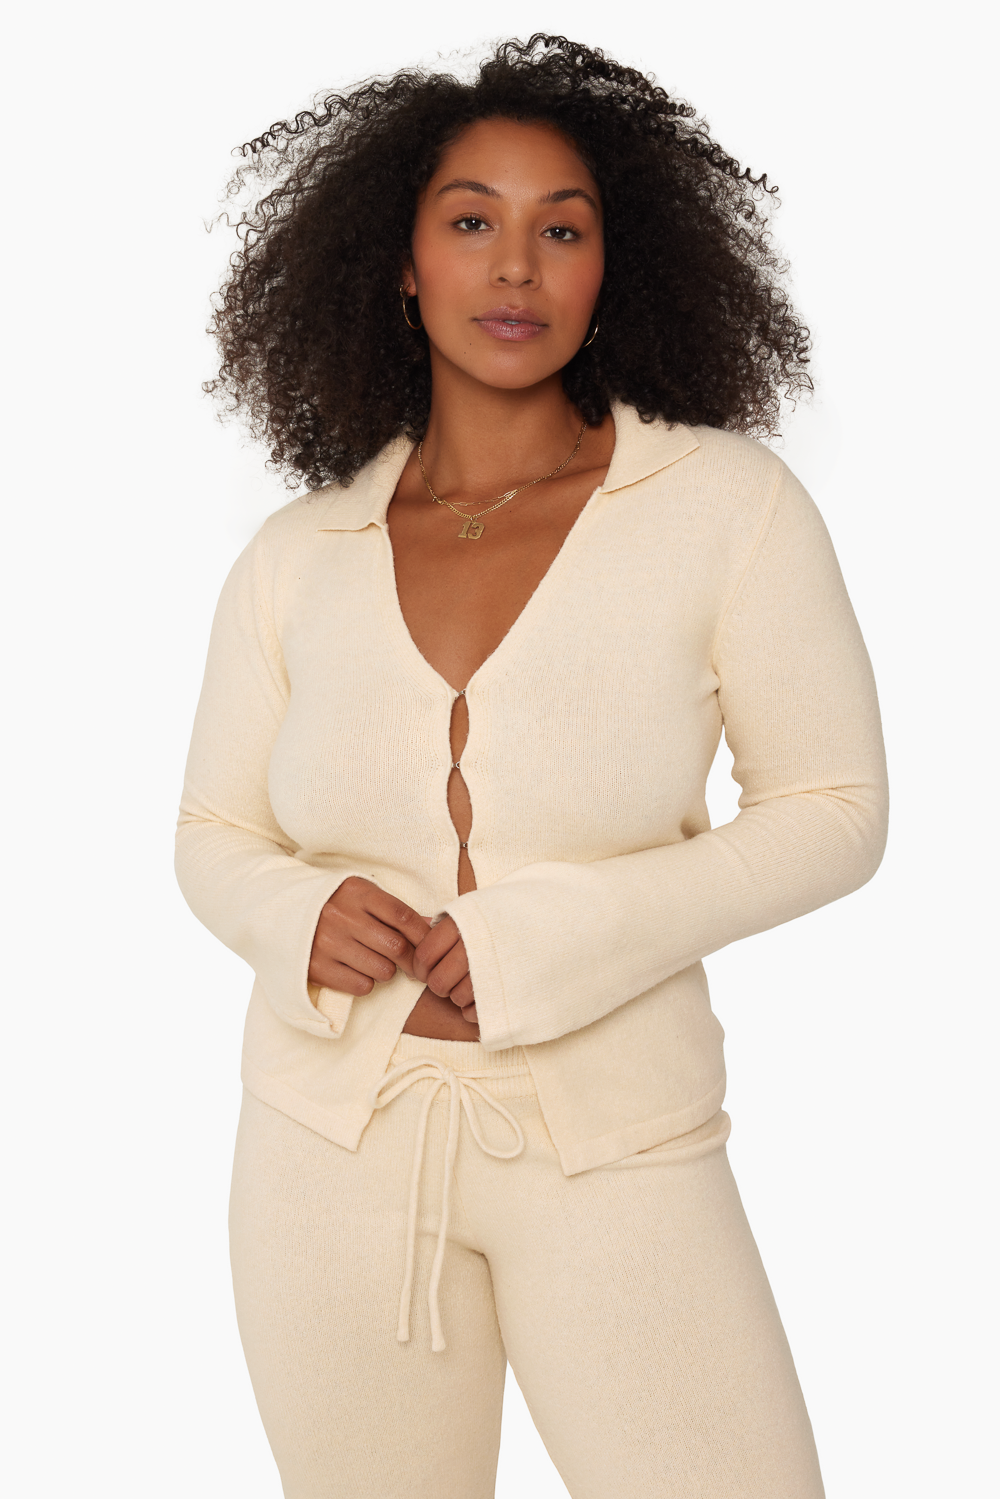 JERSEY KNIT DOUBLE V CARDIGAN - BONE Featured Image